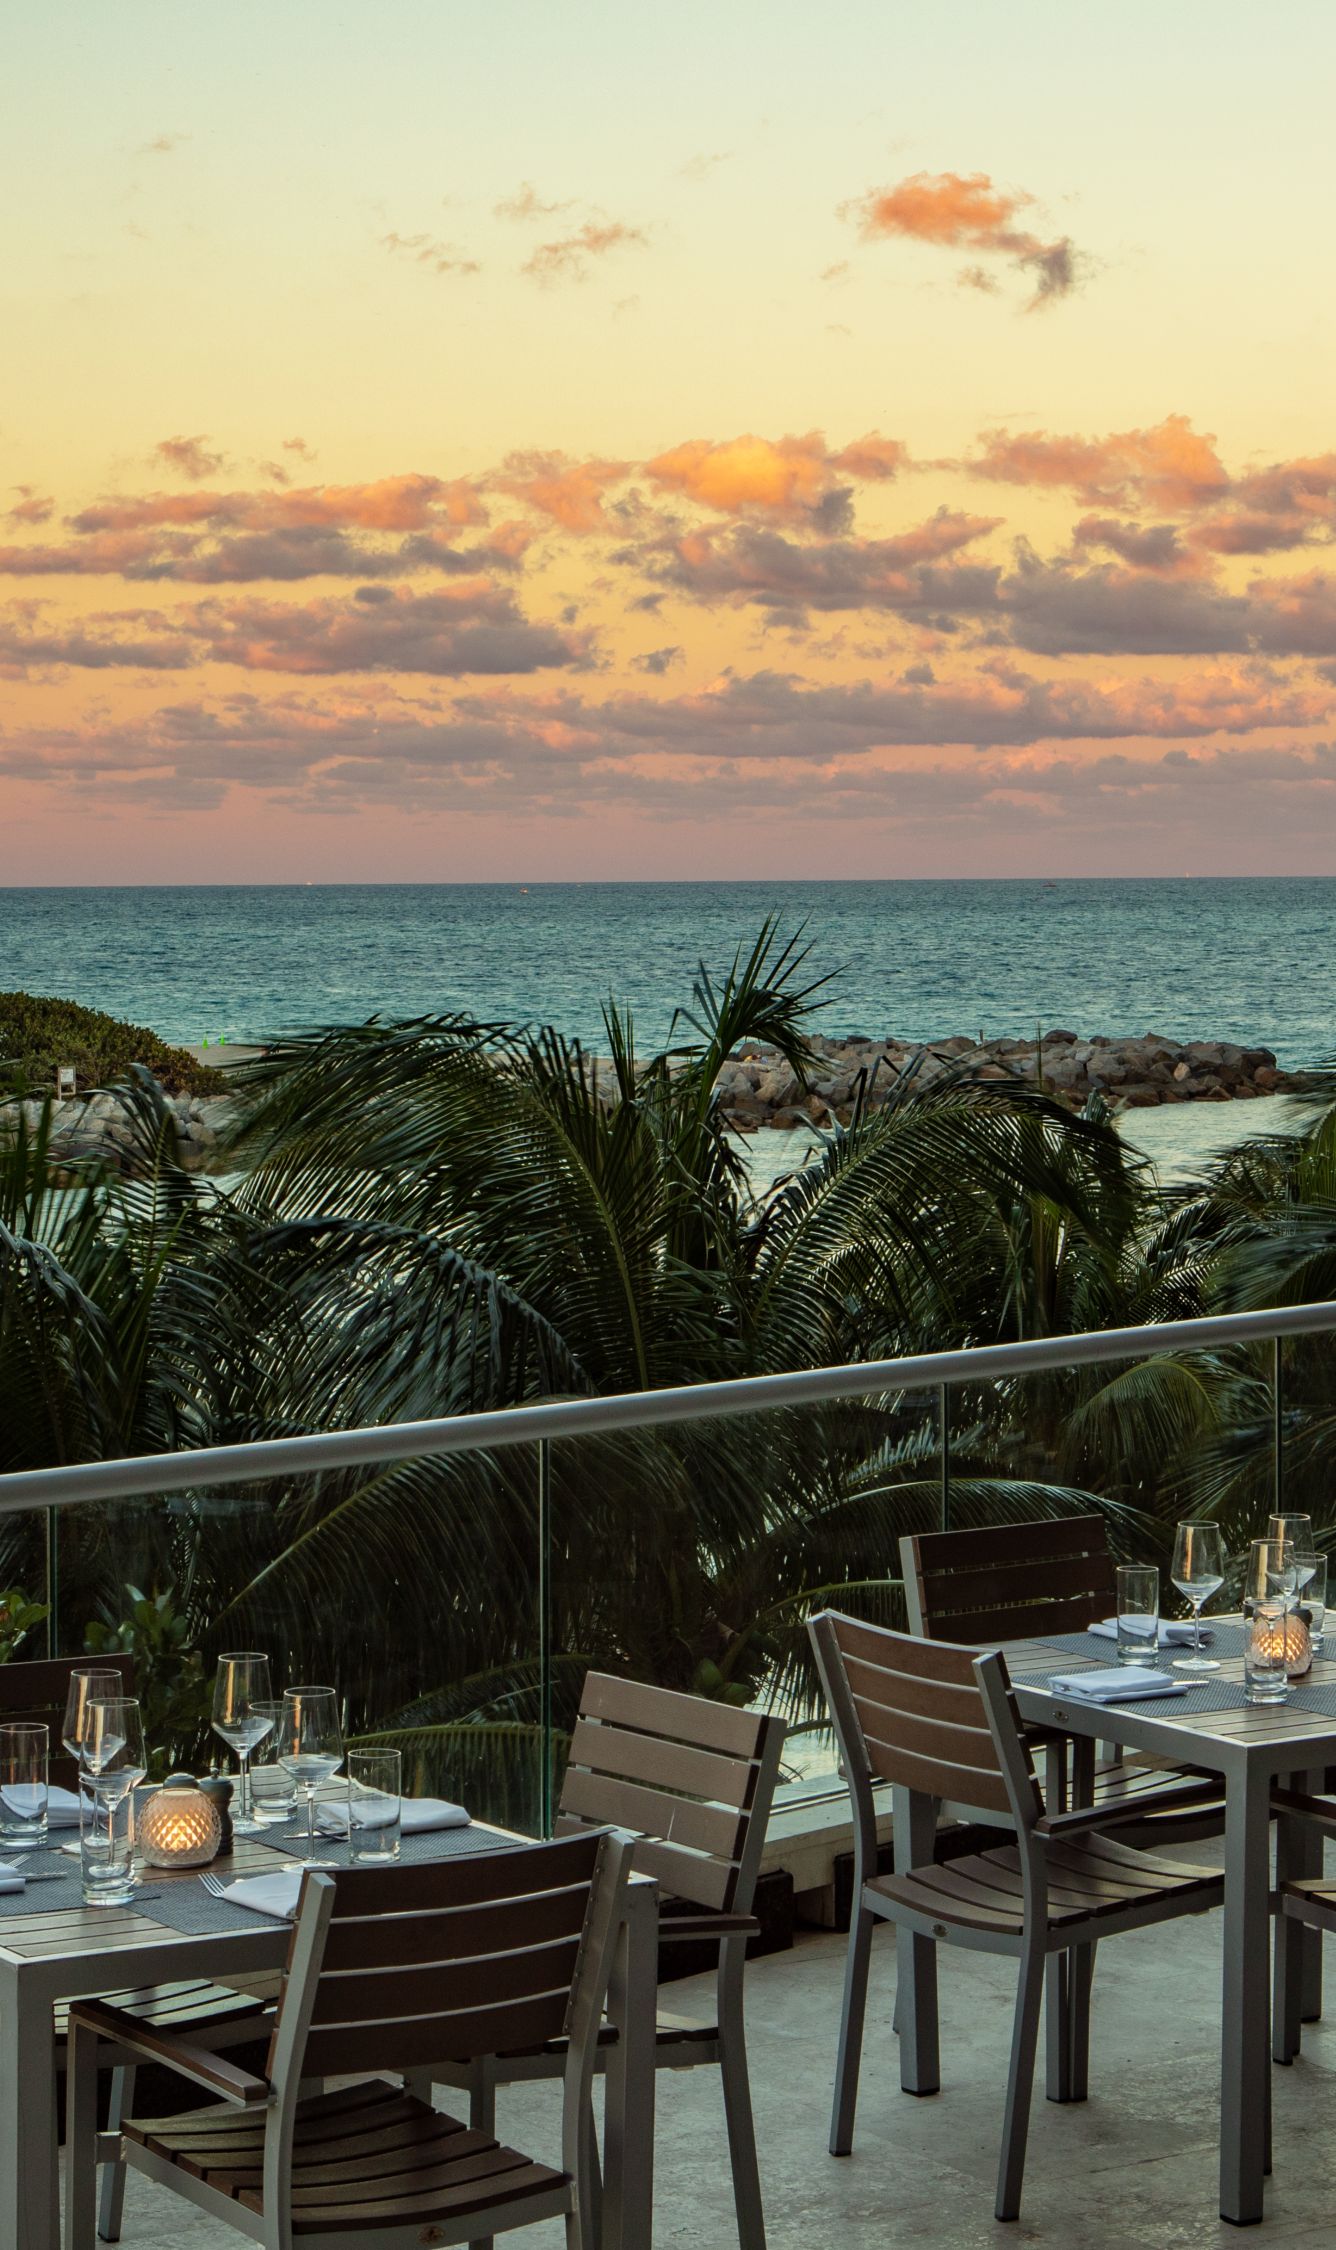 Where to stay, shop and dine in Bal Harbour, Miami.com